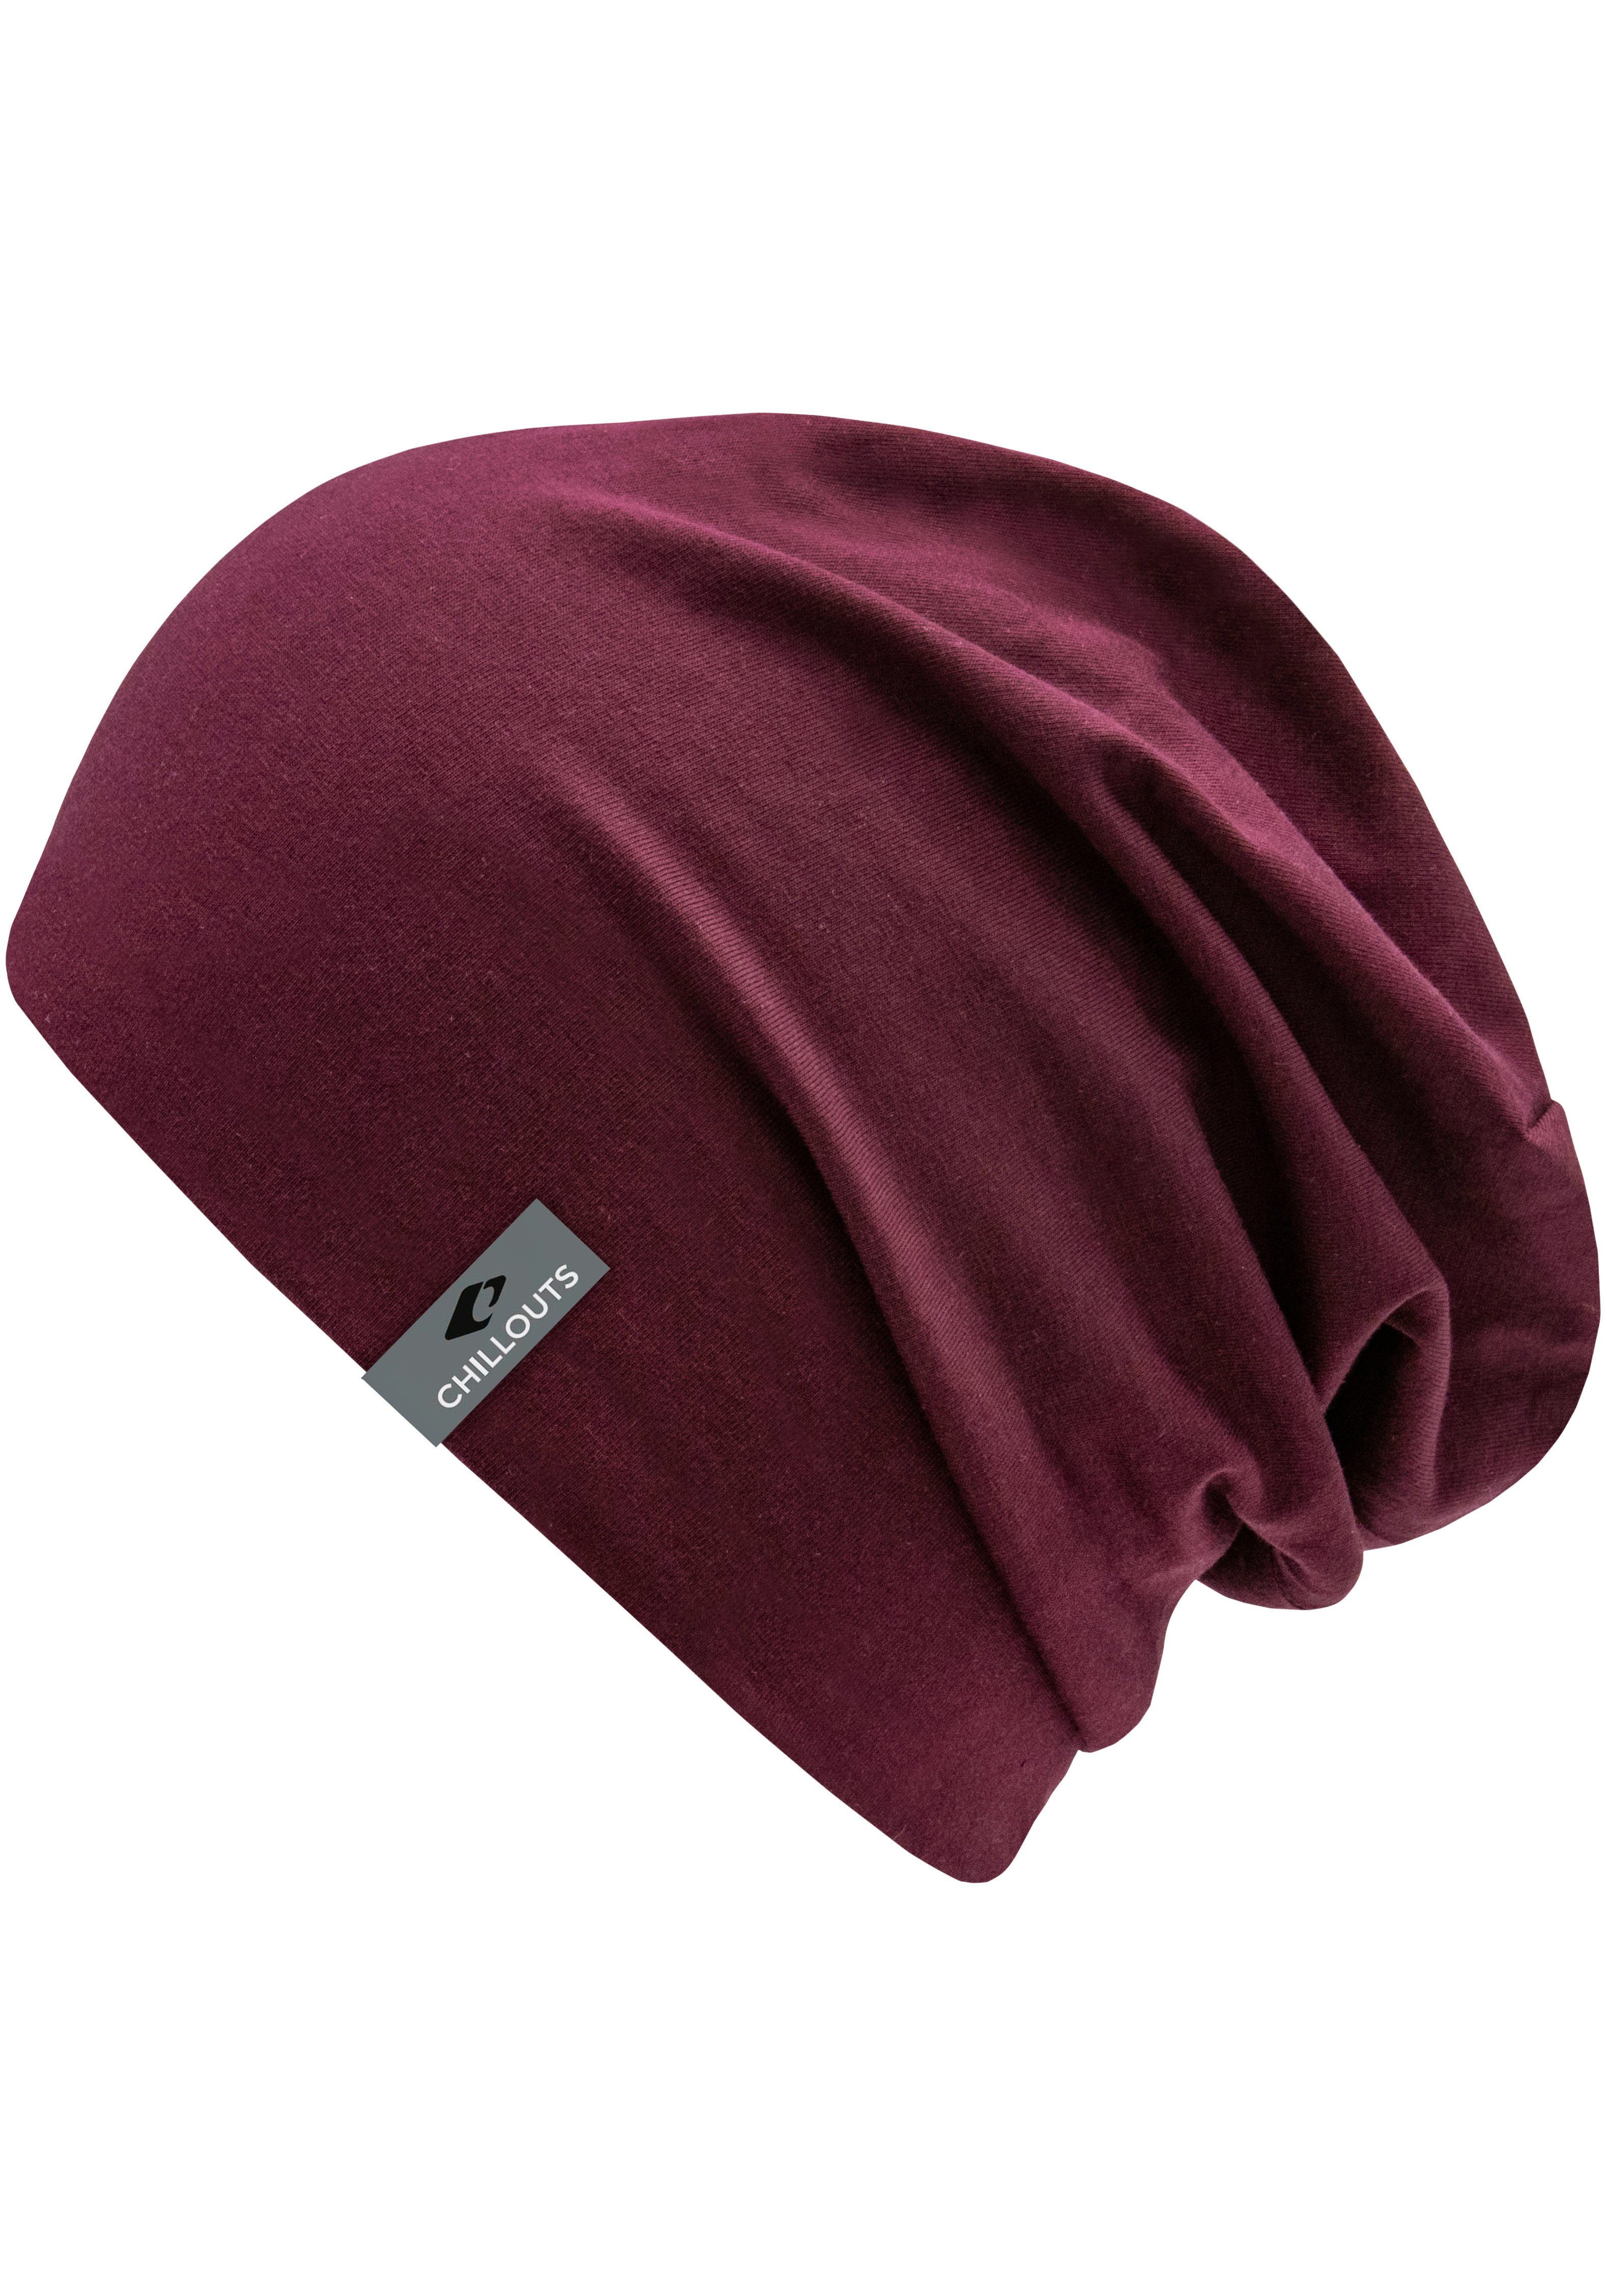 chillouts Beanie Acapulco Hat lässiger Long-Beanie-Look, Baumwoll-Elasthan-Mix bordeaux